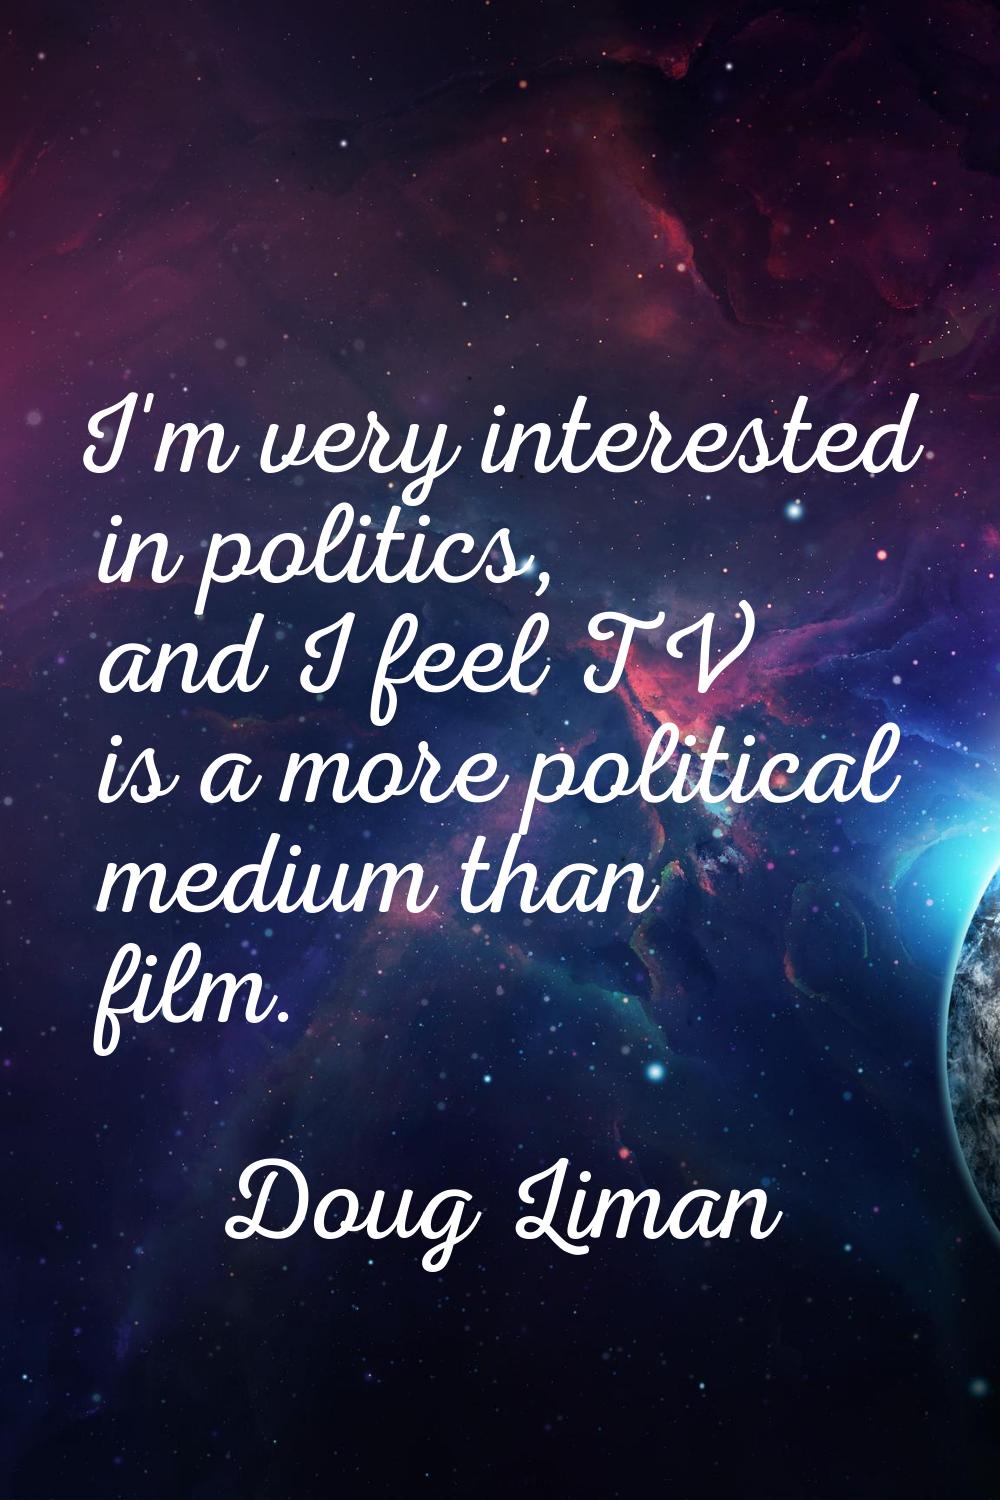 I'm very interested in politics, and I feel TV is a more political medium than film.